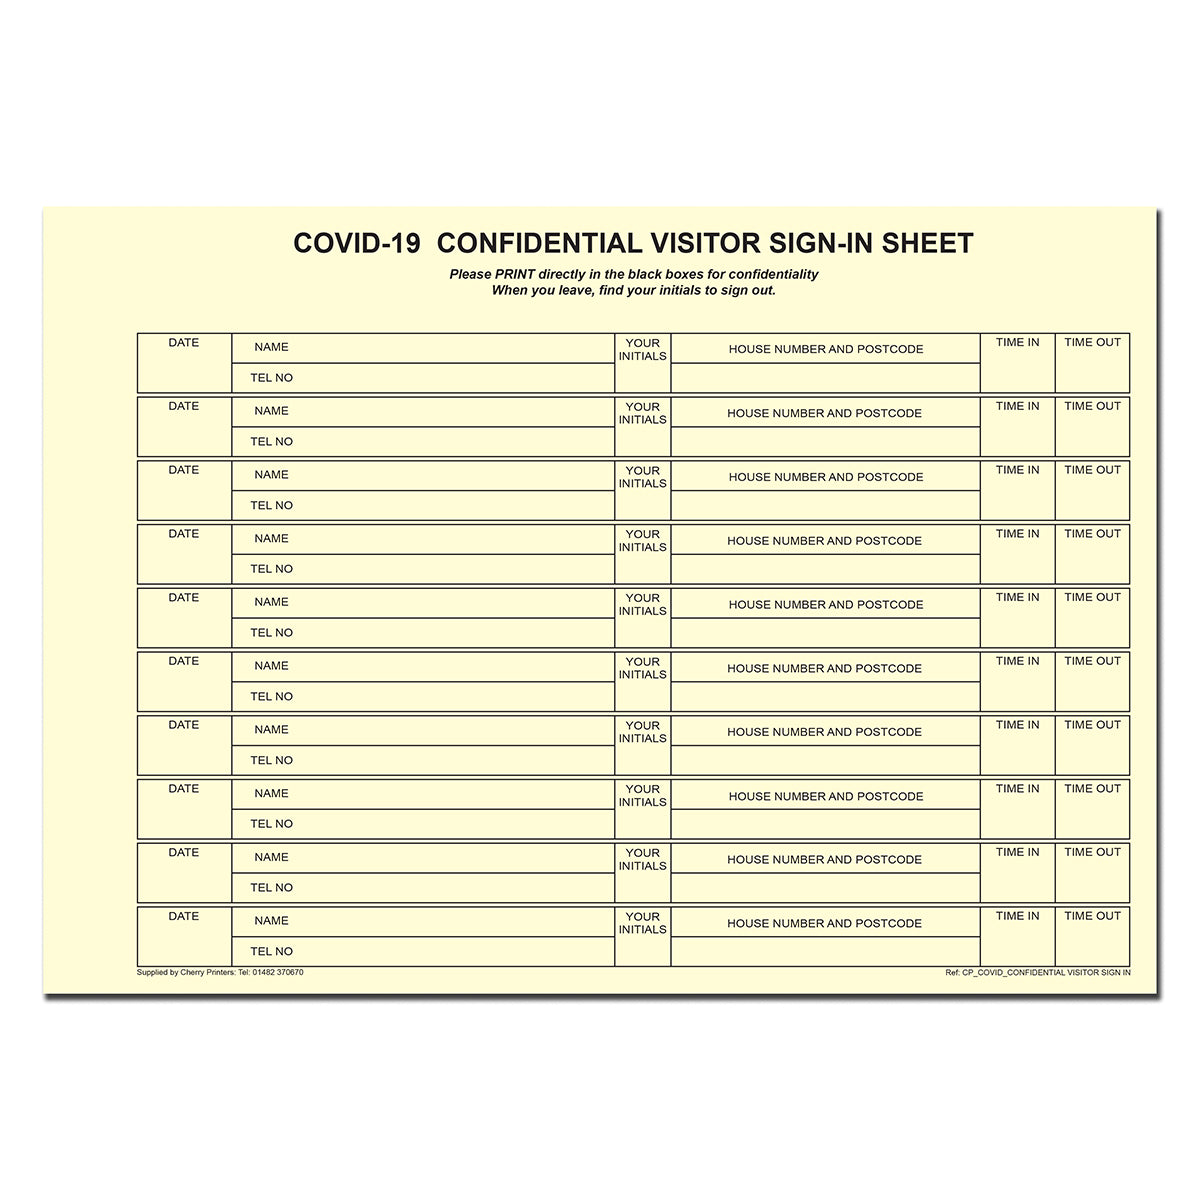 NCR Covid-19 Confidential Visitor Sign in Duplicate Wiro Book A4 50 sets GDPR